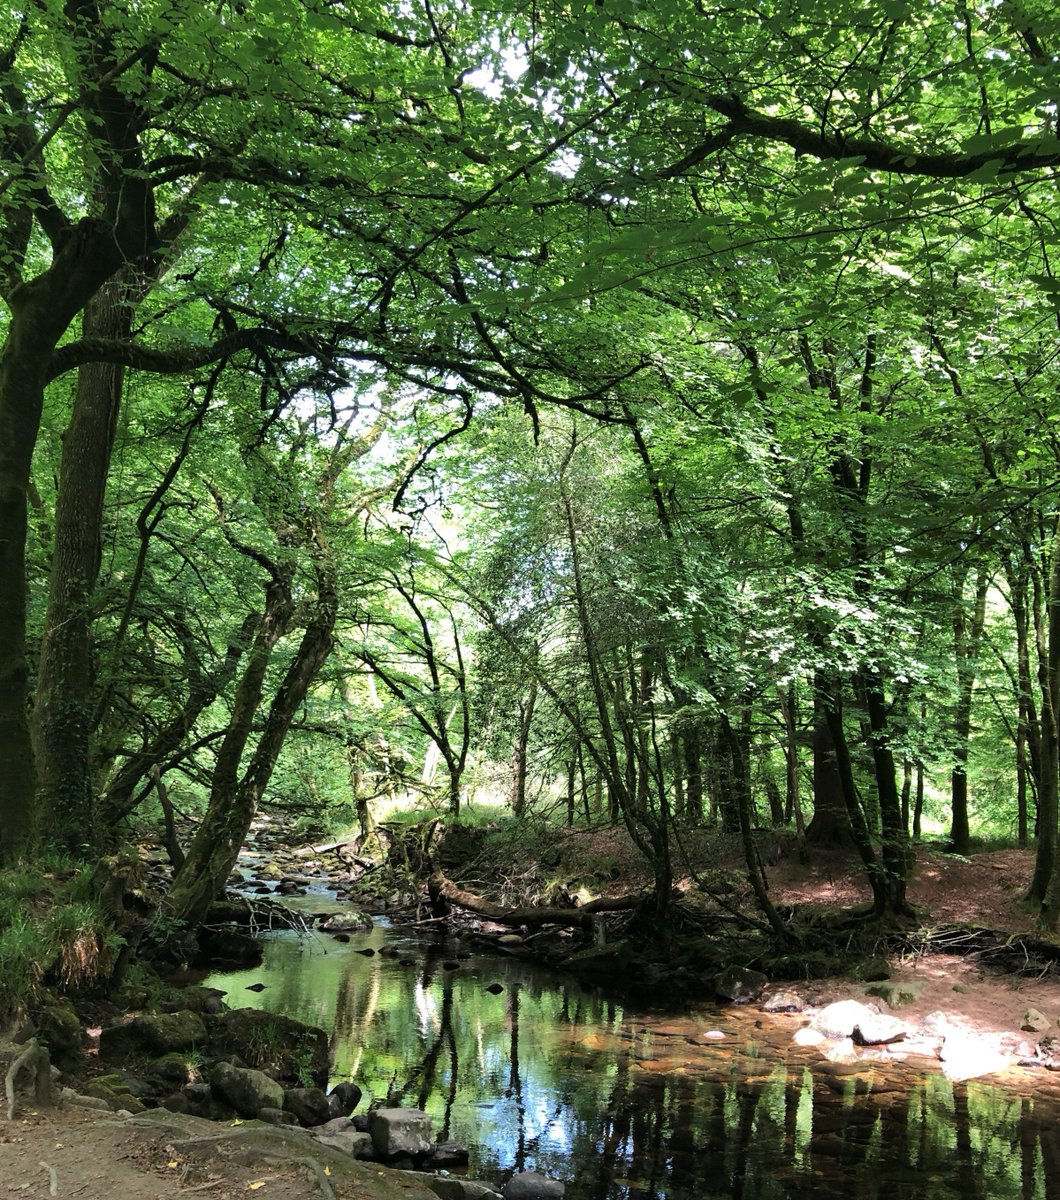 Here's a pic of Longtimber Woods, one of our favourite spots in #Devon from the weekend. Happy #DevonDay to our lovely clients in this beautiful county @PaigntonZoo @LivingCoasts @ERBIDCo  @SparkworldLTD @DevonCountyShow #LoveDevon #topdestination #DevonHeaven #holidays